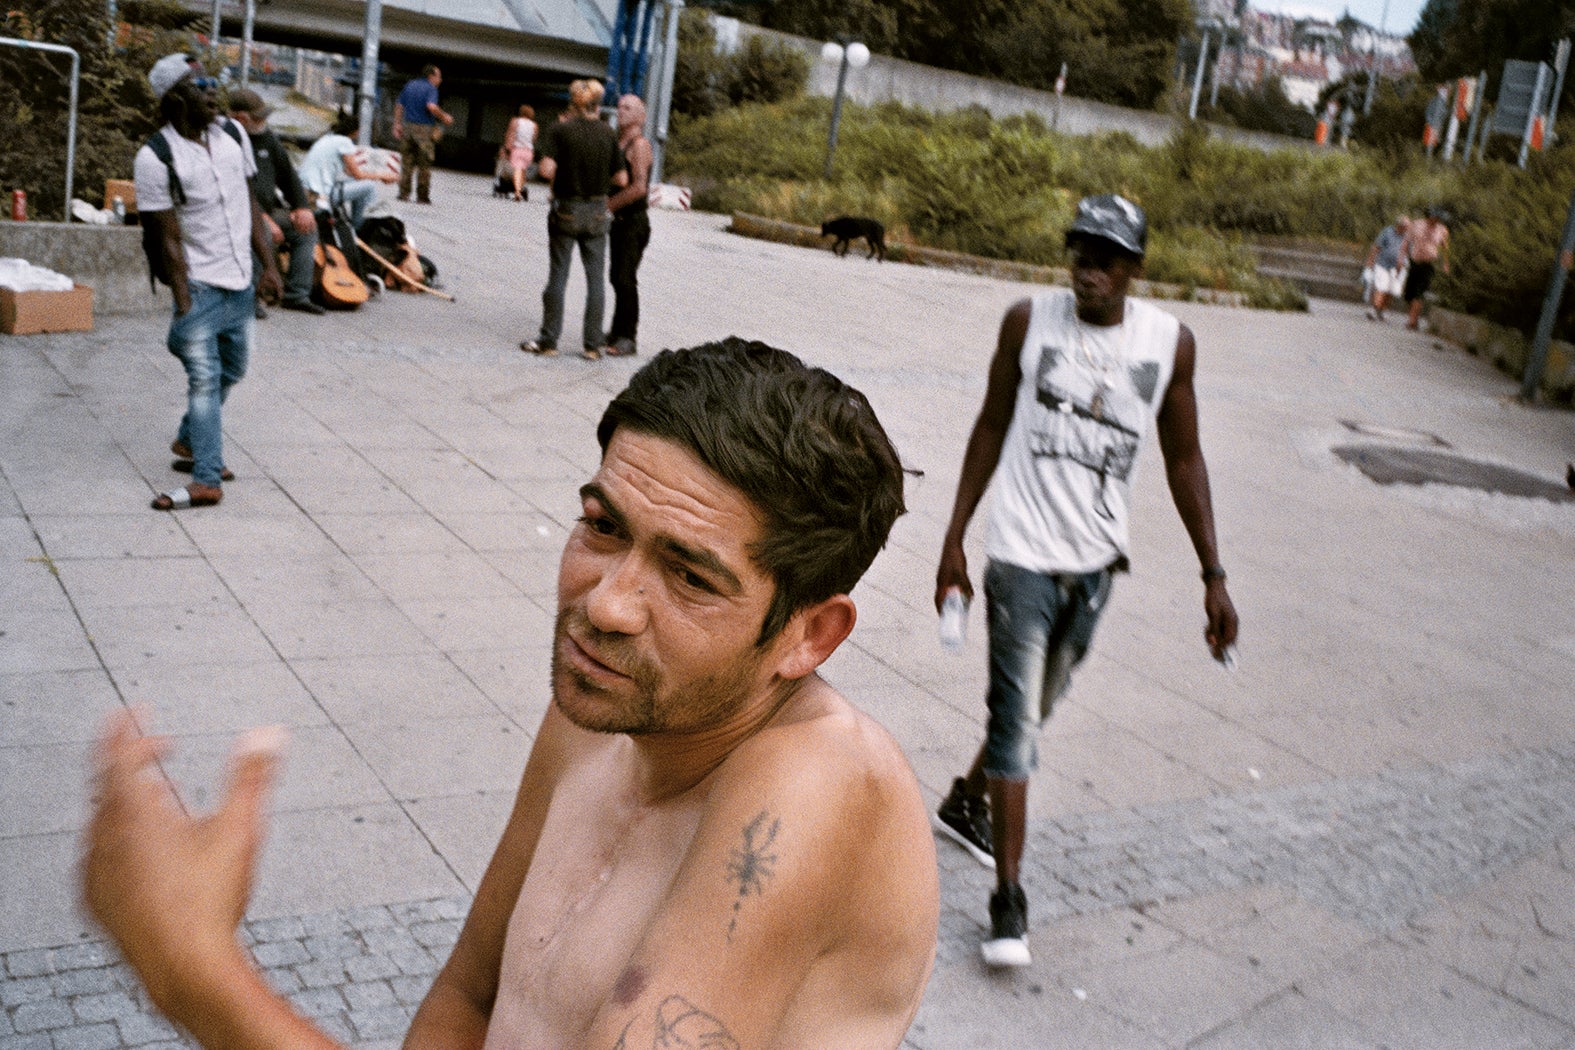 A man breaks away from a group of homeless people around the central station to chat with the photographer in Gorlitz